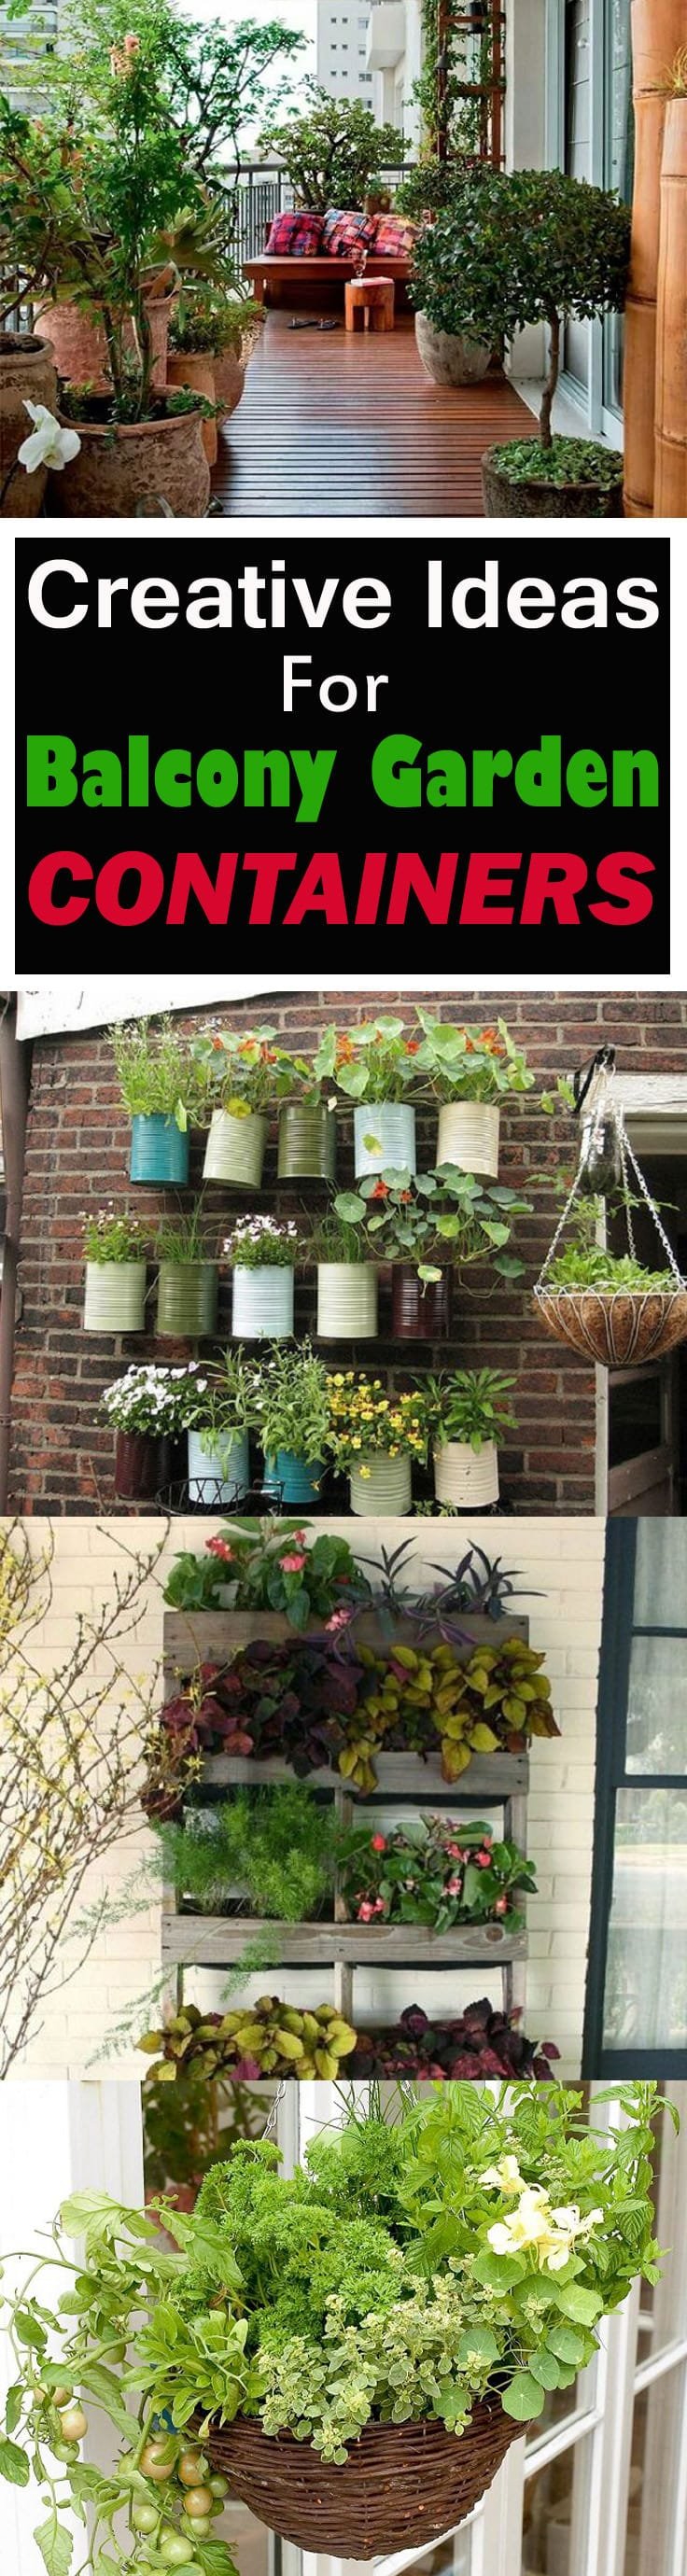 If you have a balcony garden, it doesn't mean you can't be creative and do something unusual-- Here're some ideas to inspire you!